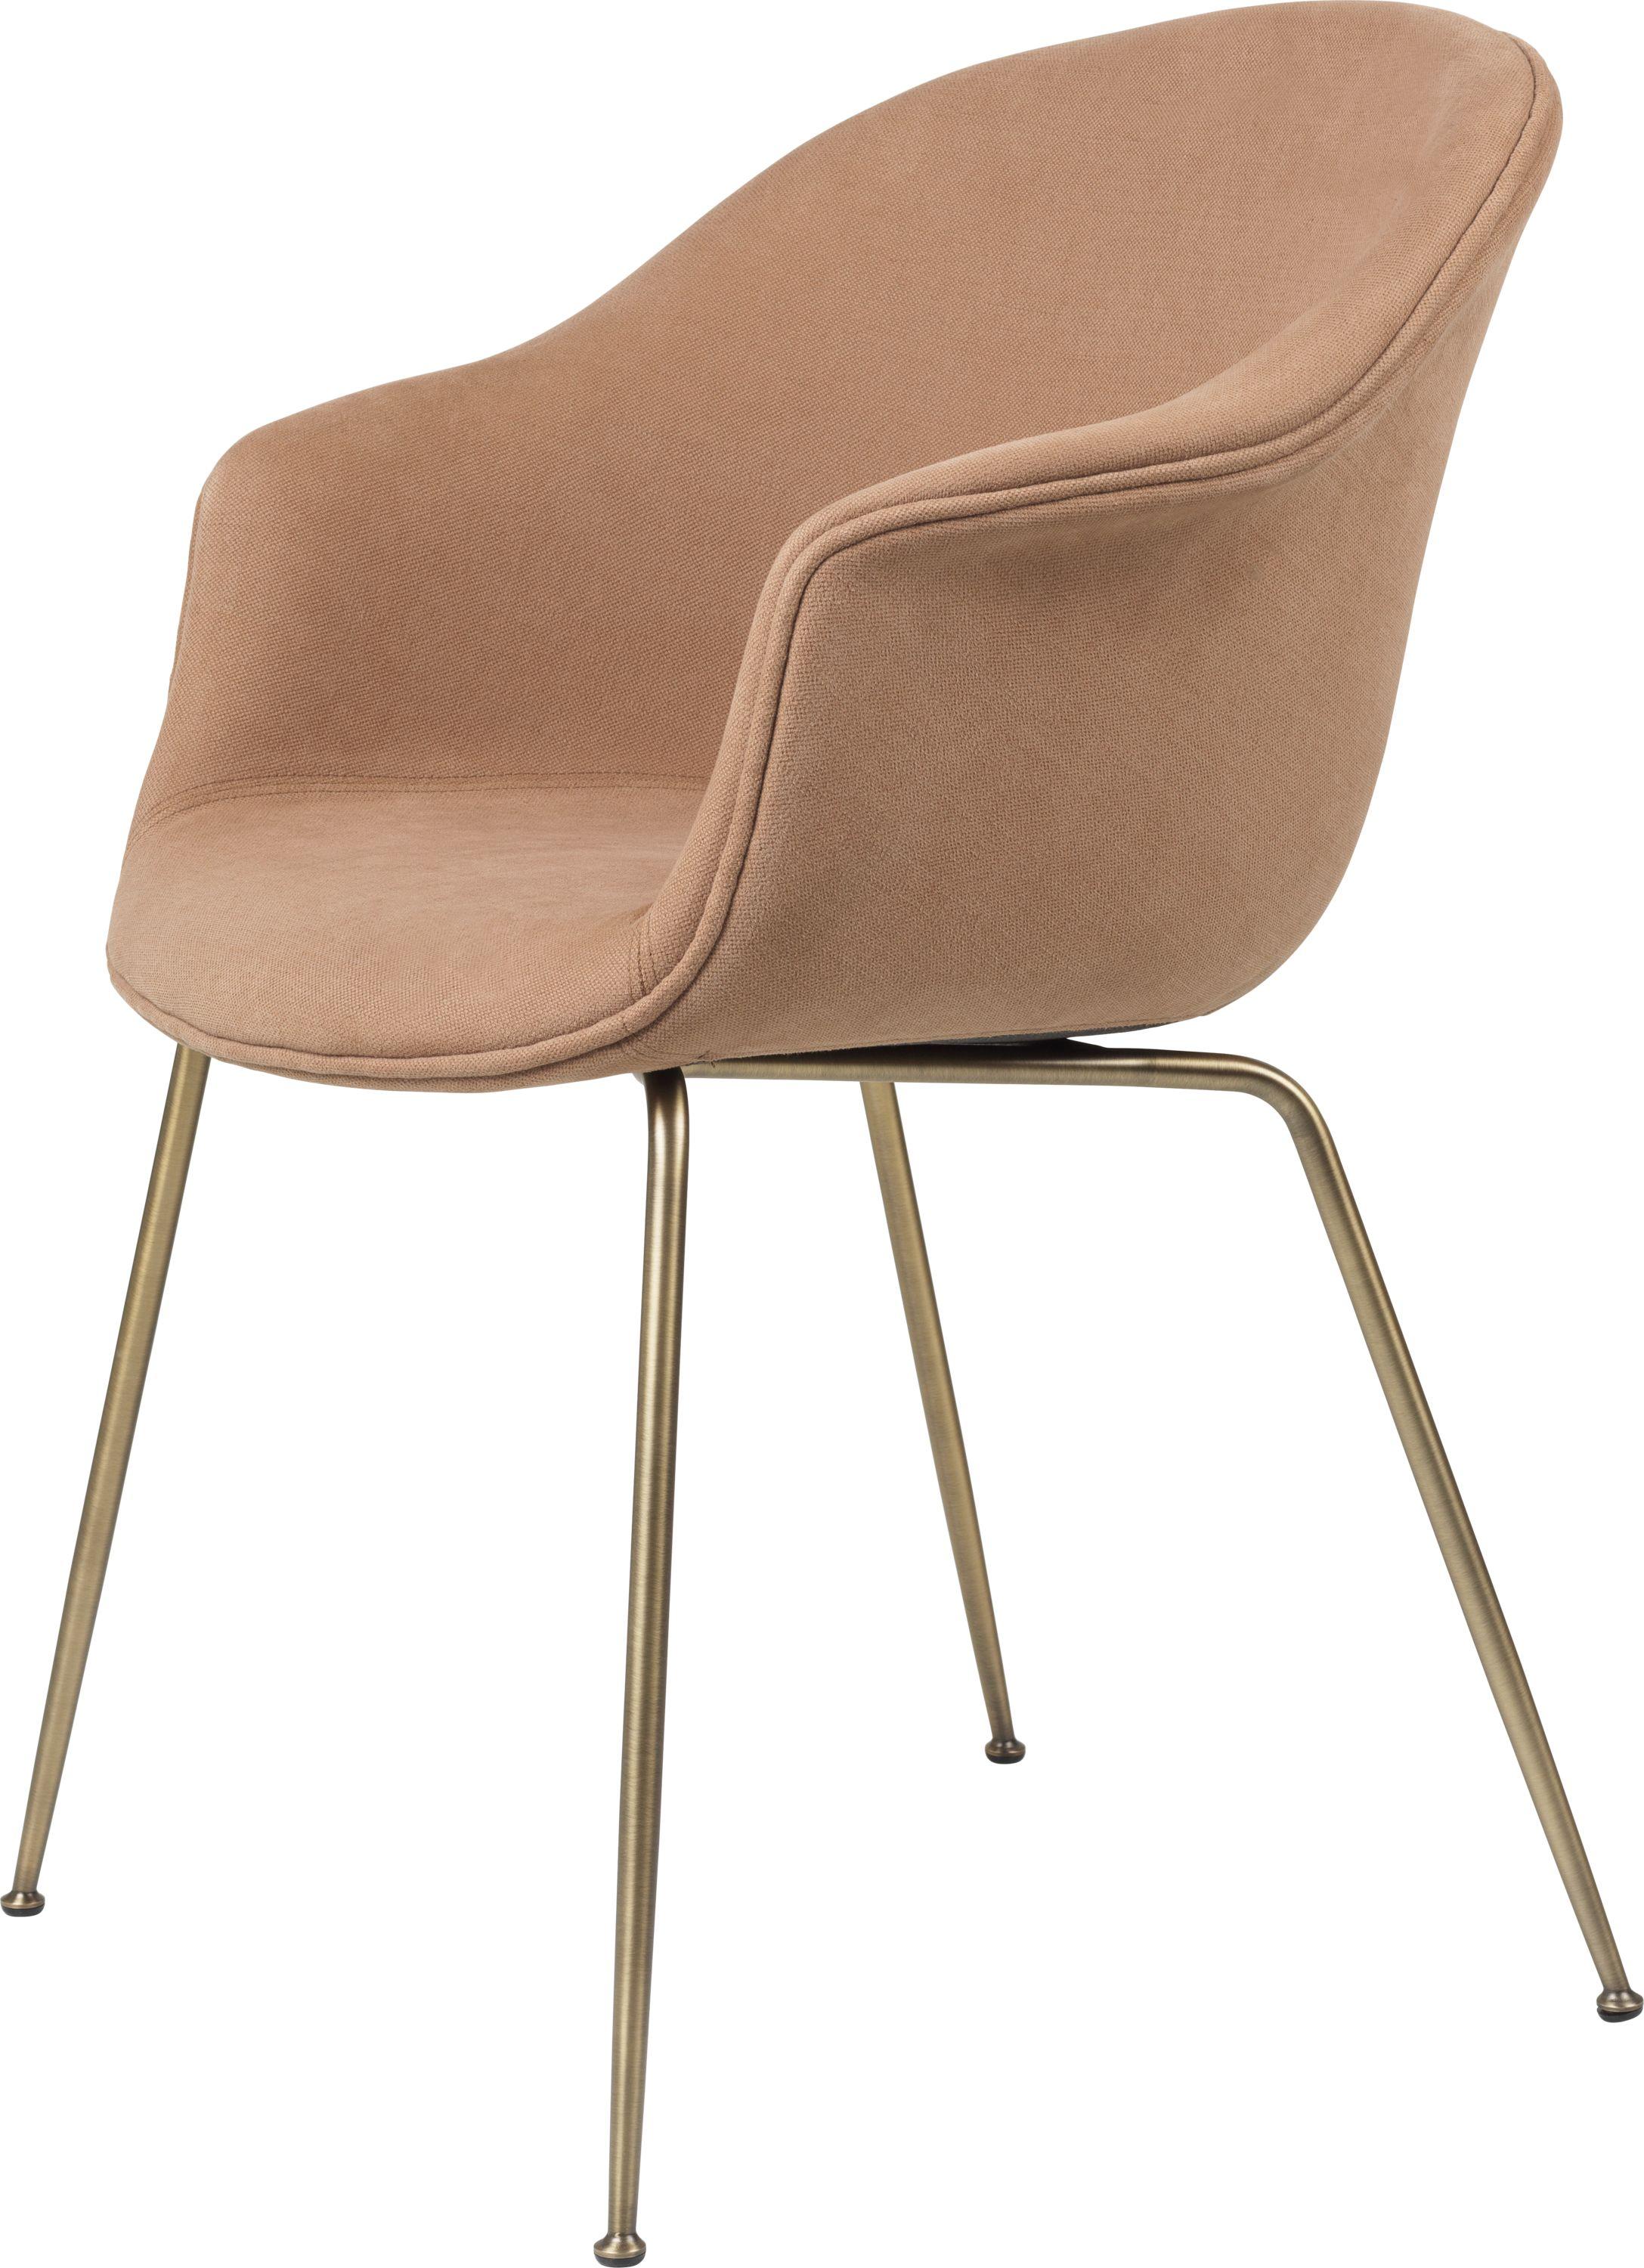 Contemporary GamFratesi 'Bat' Dining Chair in Grey with Antique Brass Conic Base